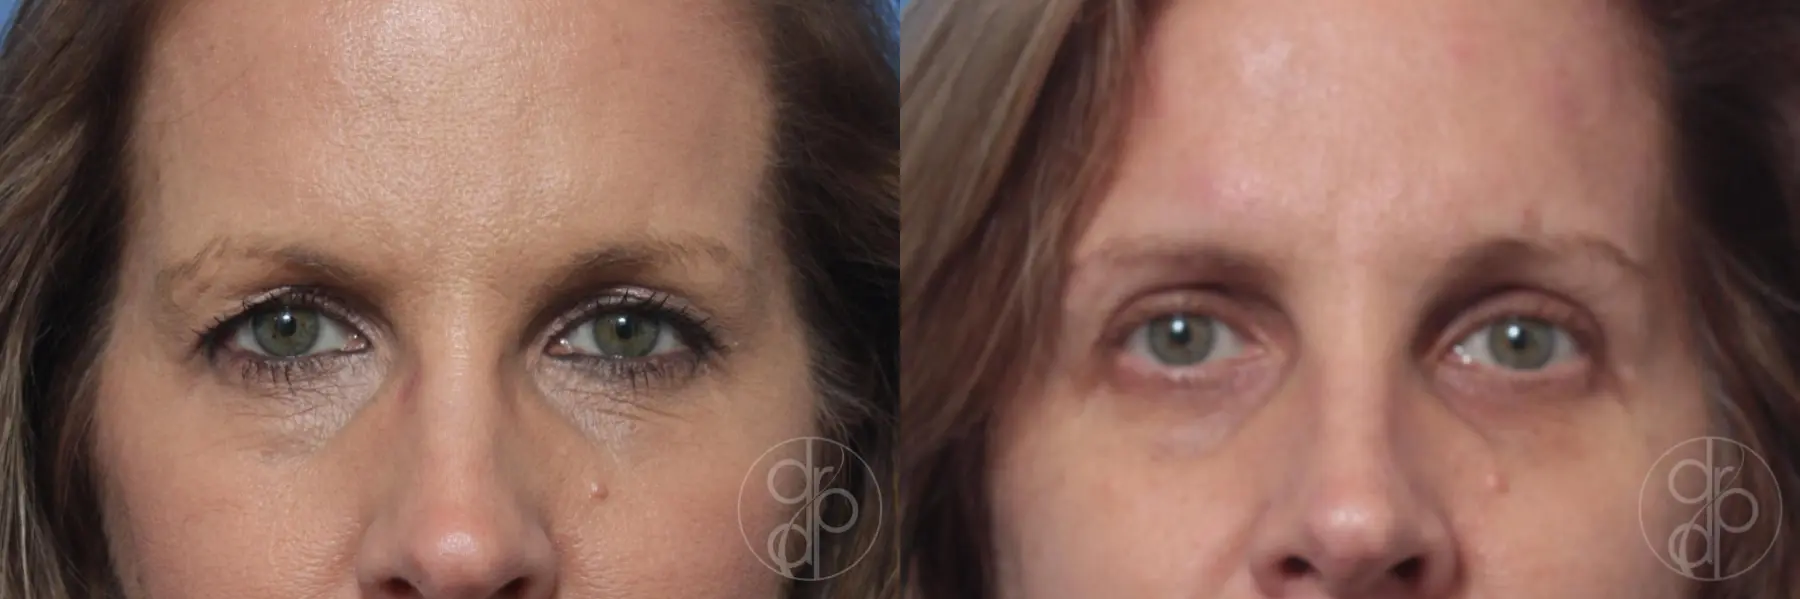 patient 10511 blepharoplasty before and after result - Before and After 1